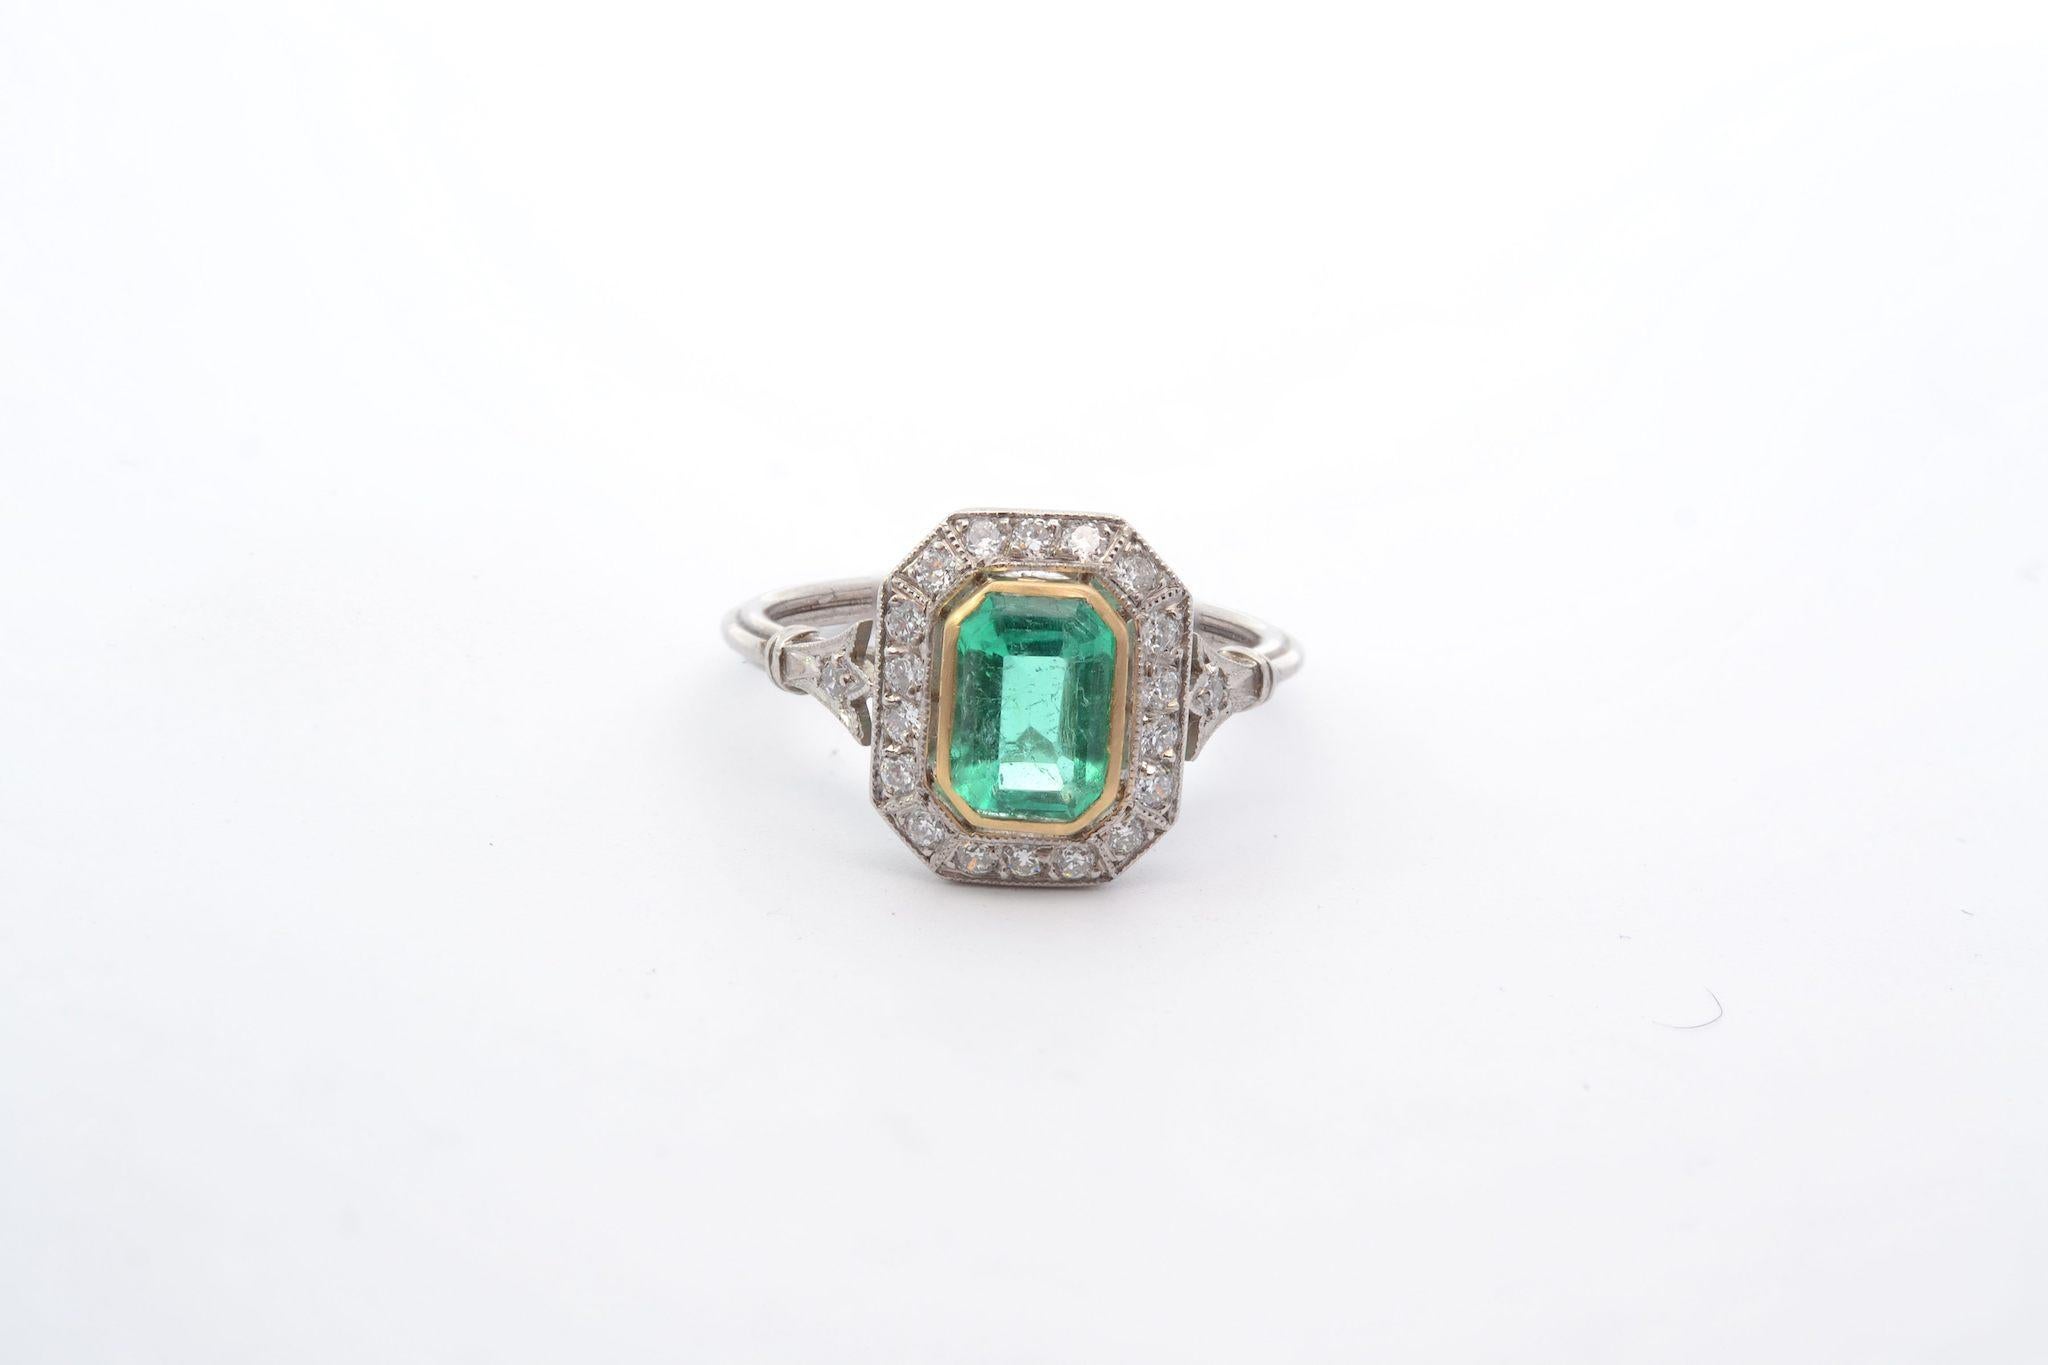 Stones: 1 emerald of 1ct, 20 diamonds: 0.45ct
Material: Platinum and yellow gold
Dimensions: 1.2cm x 1cm
Weight: 3.6g
Period: Art Deco style
Size: 52 (free sizing)
Certificate
Ref. : 25163-25020